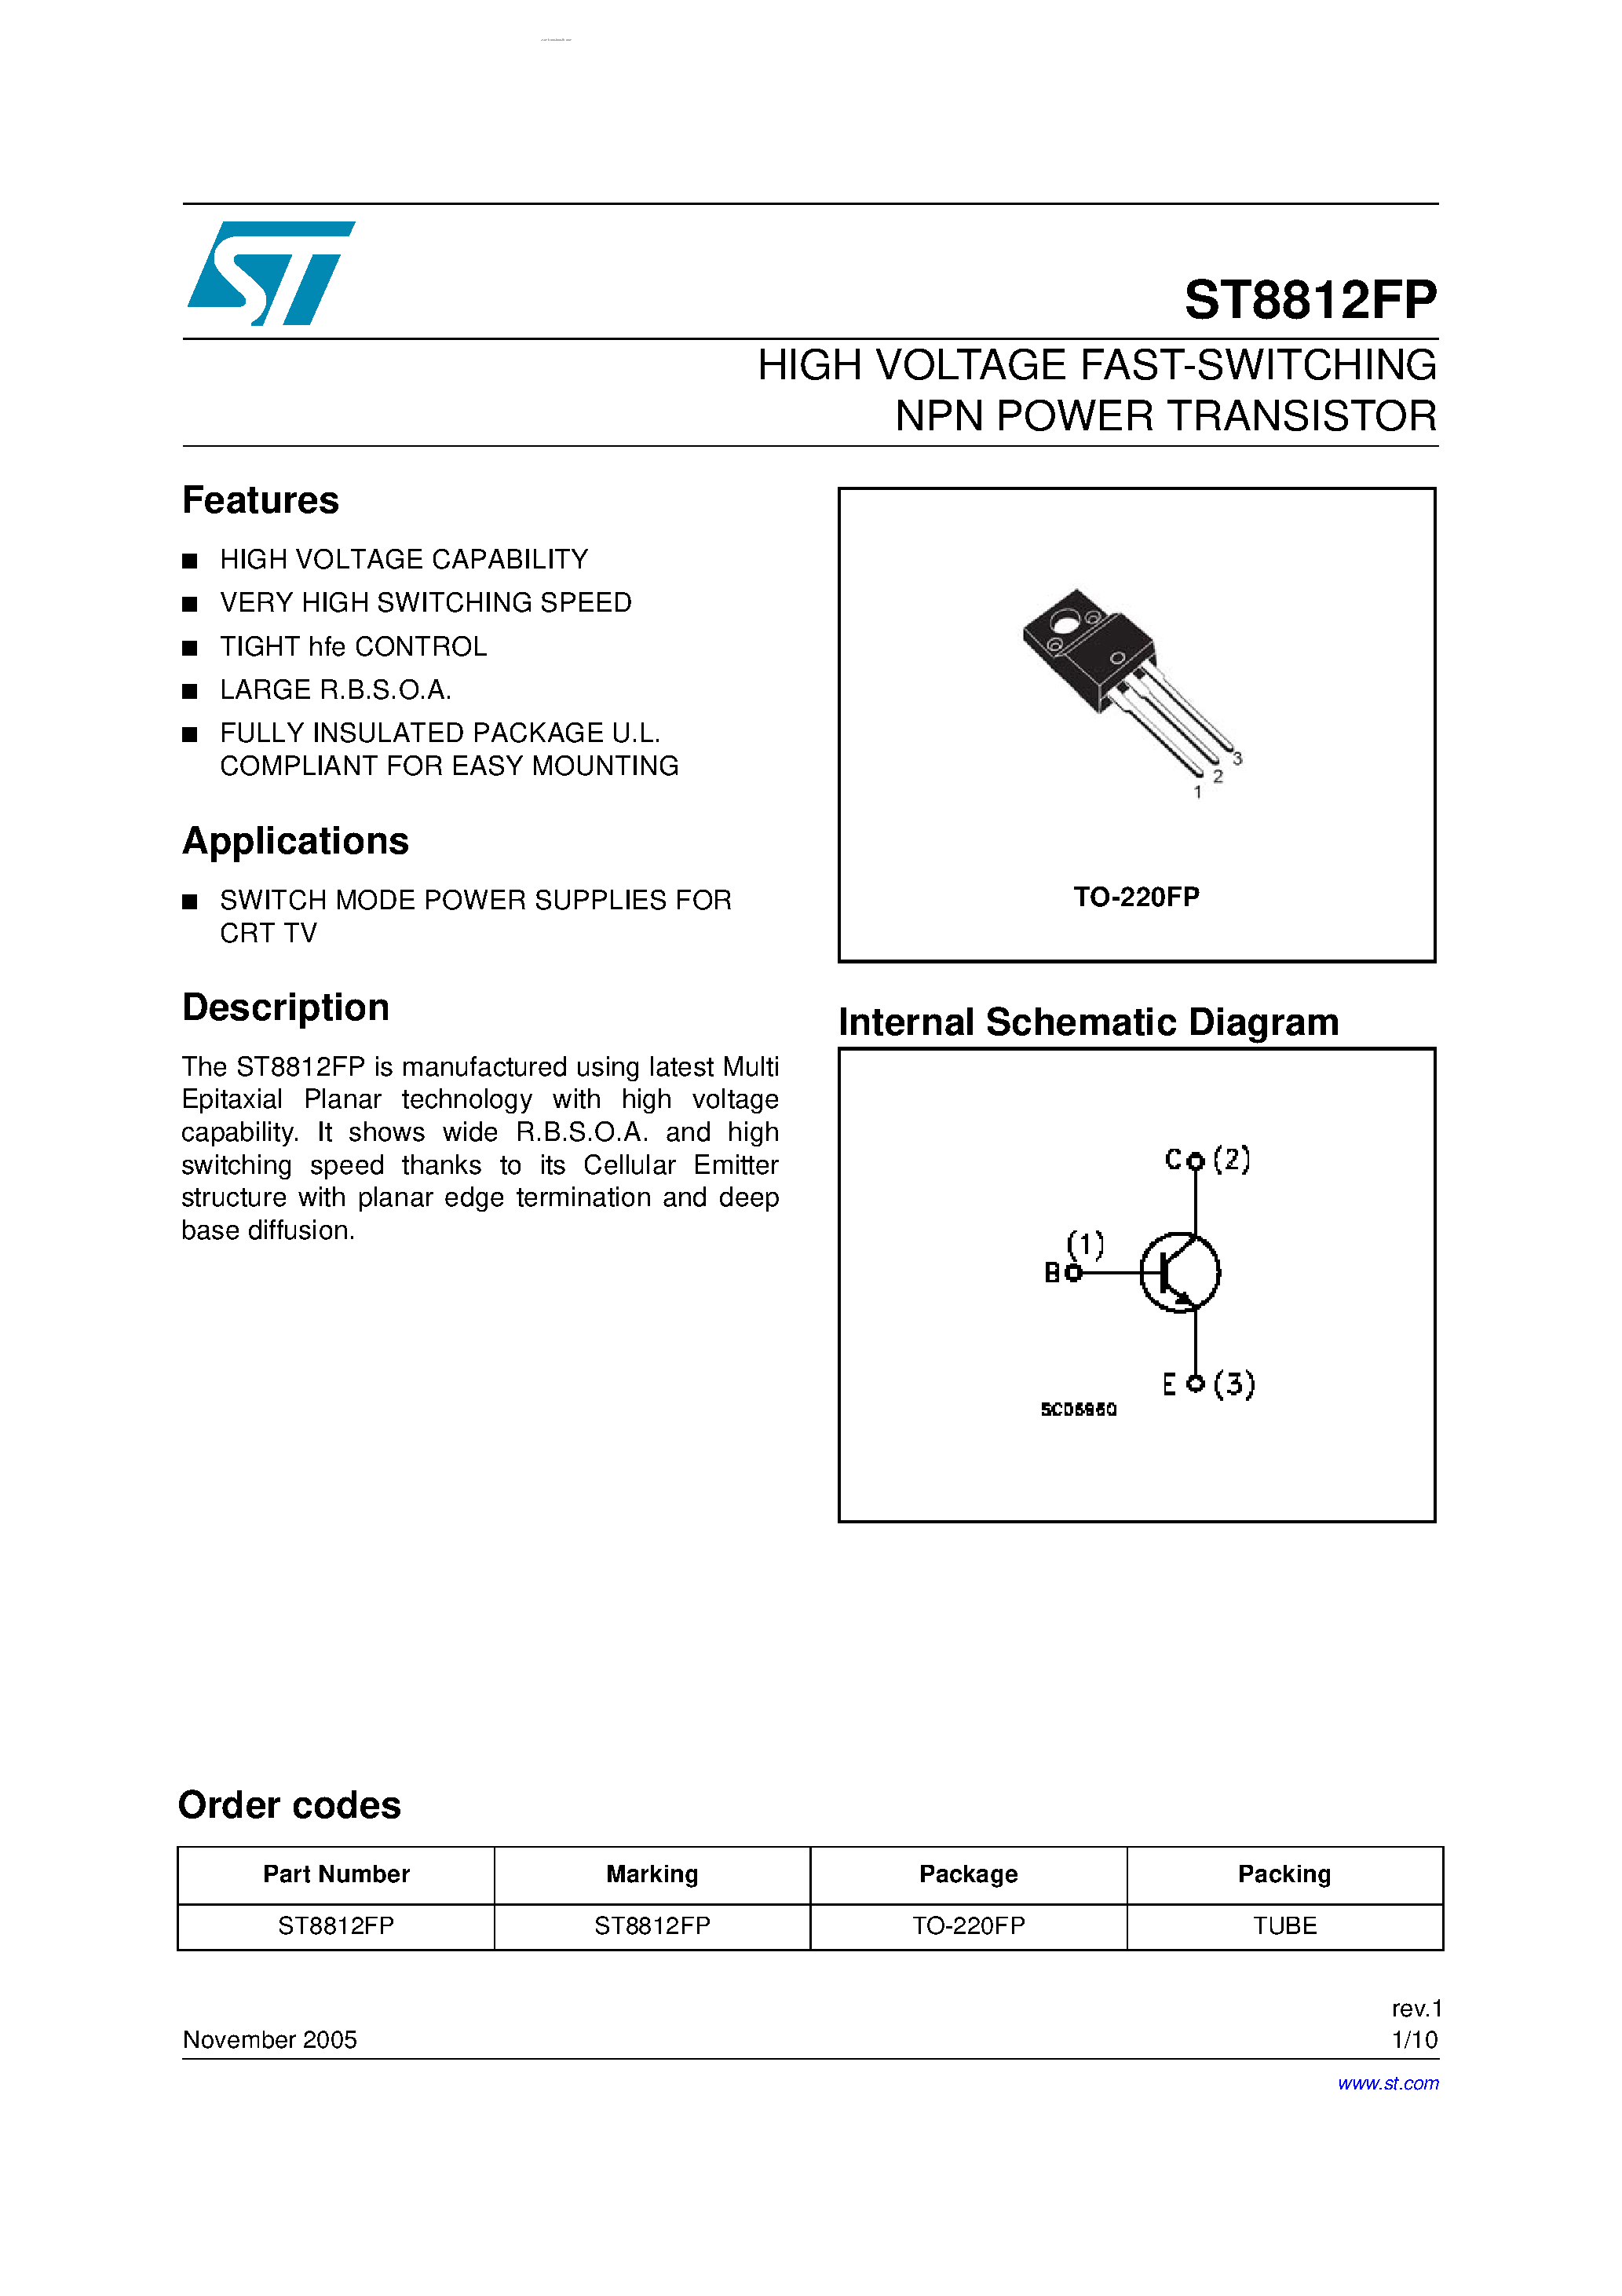 Datasheet ST8812FP - High voltage fast-switching NPN Power transistor page 1